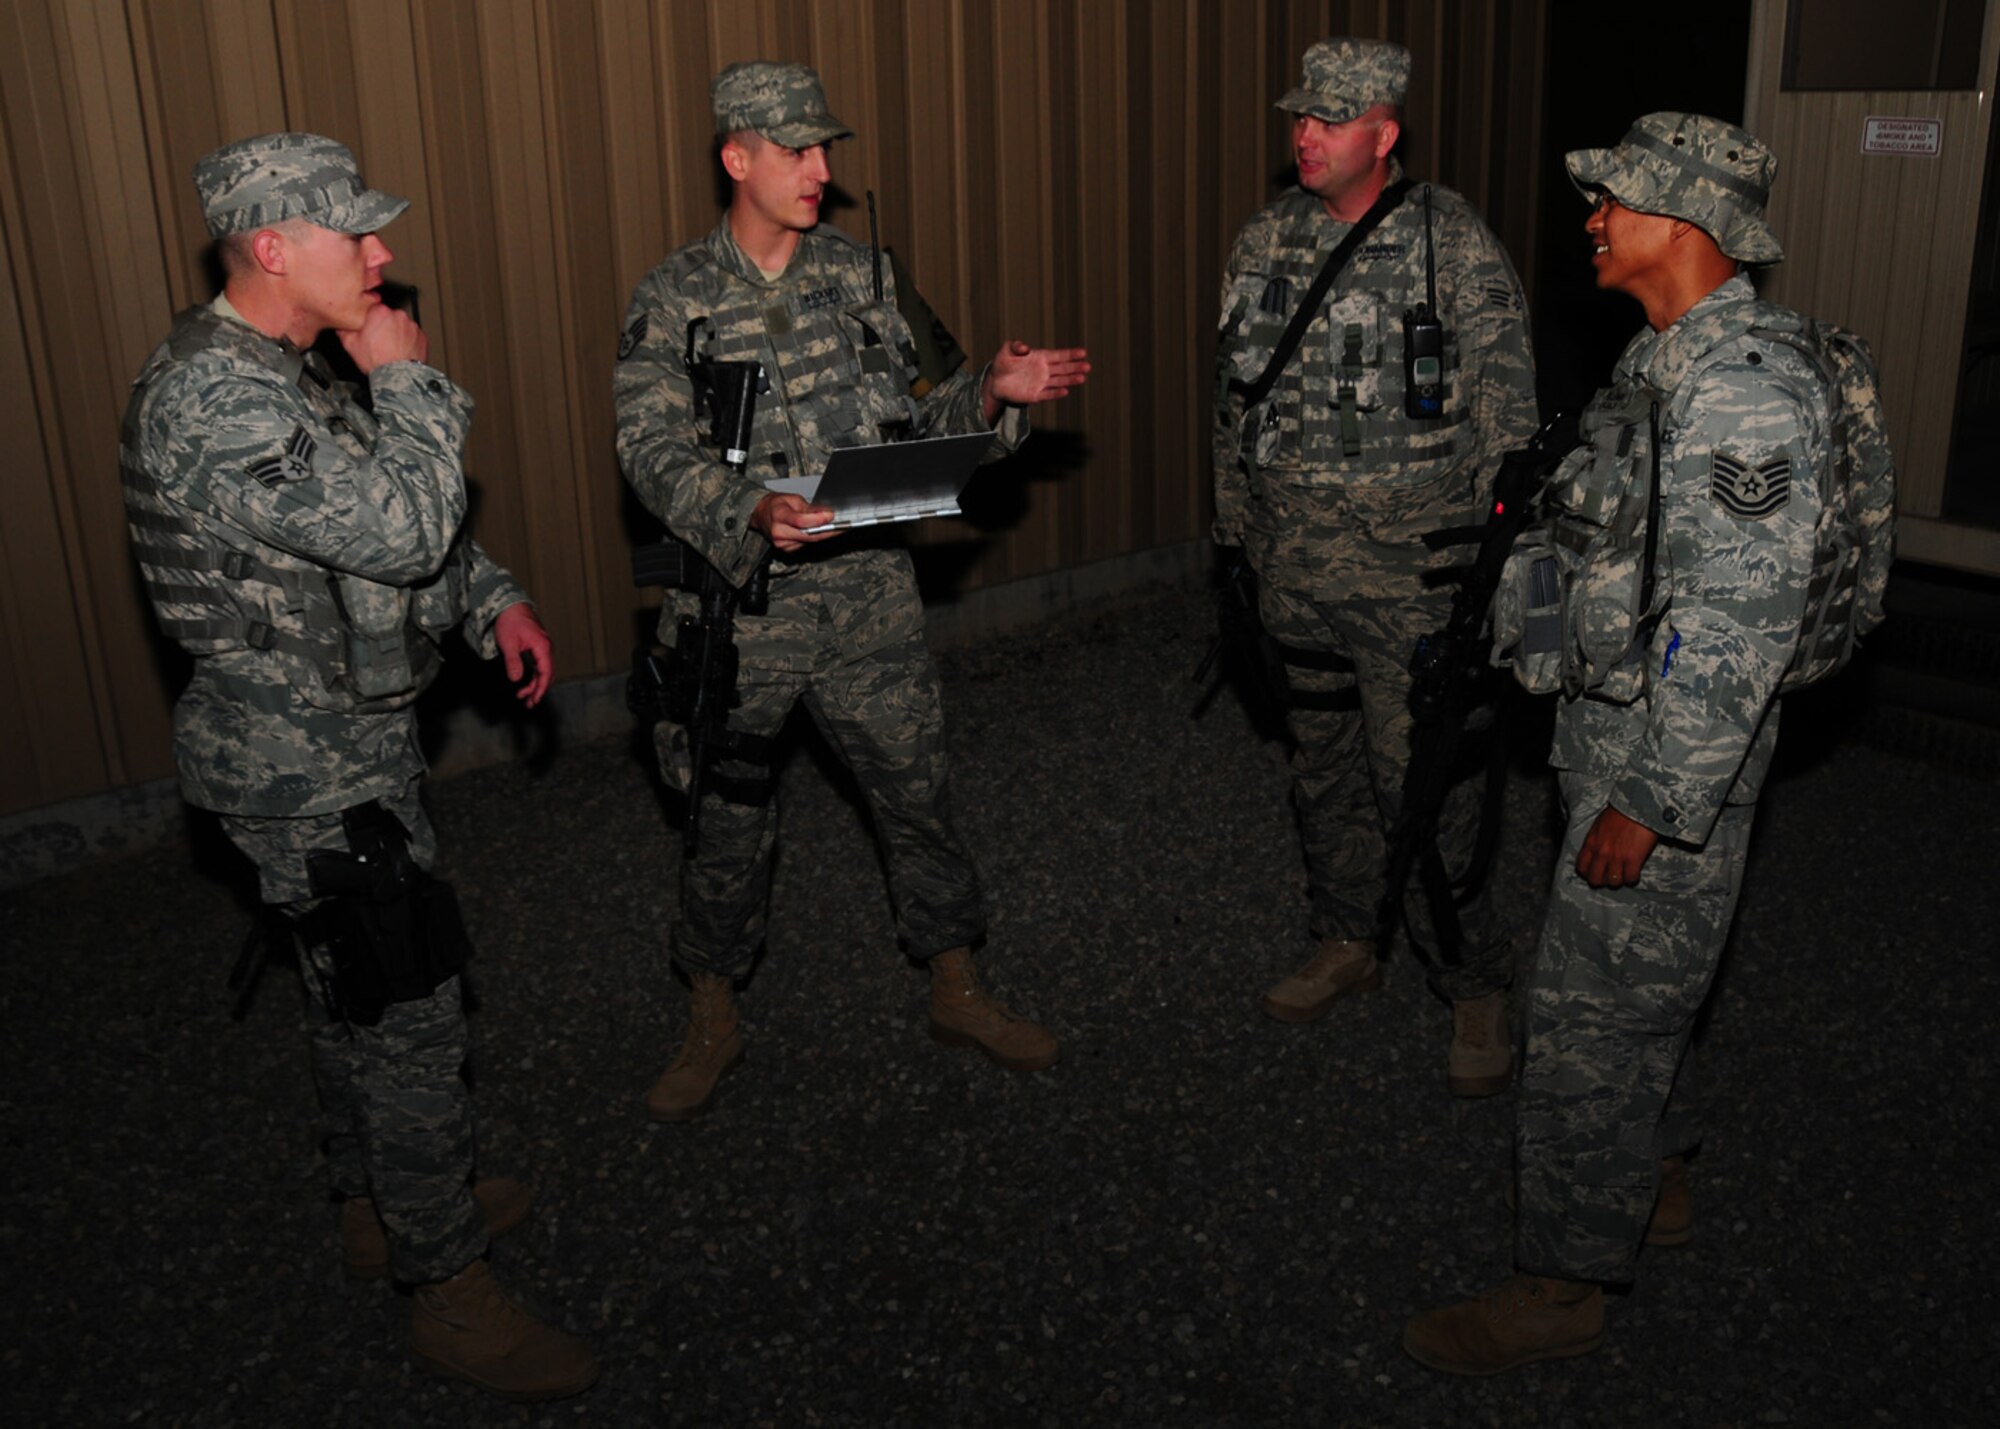 SOUTHWEST ASIA -- Staff Sgt. Nicholas Nickert, 386th Expeditionary Security Forces Squadron security escort team, briefs a mission to other team members after arming up at an air base in Southwest Asia, April 15. The SET is responsible for the safety and security of moving a mass amount of personnel from one destination to another. Sergeant Nickert is currently deployed from Nellis Air Force Base, Nev. and is originally from Grayling, Mich. (U.S. Air Force photo/ Senior Airman Courtney Richardson)